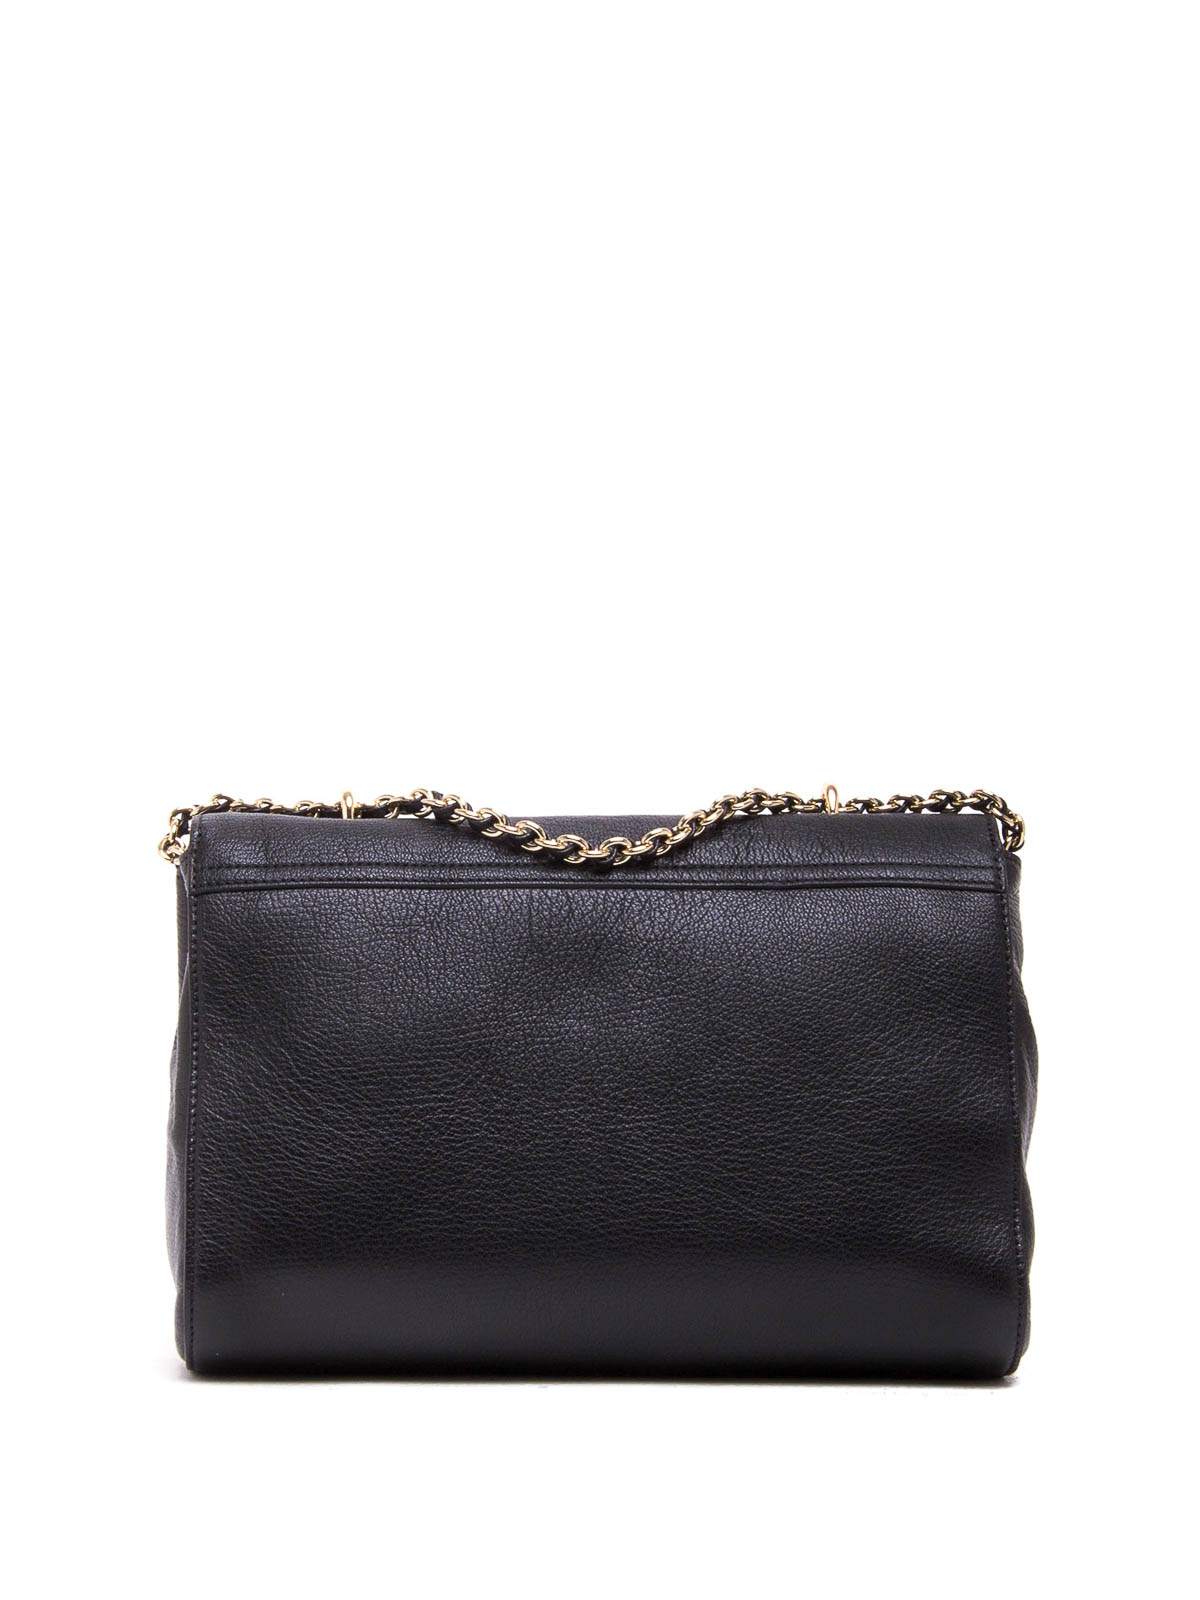 Shop Mulberry Medium Lily Goat Leather Bag In Black